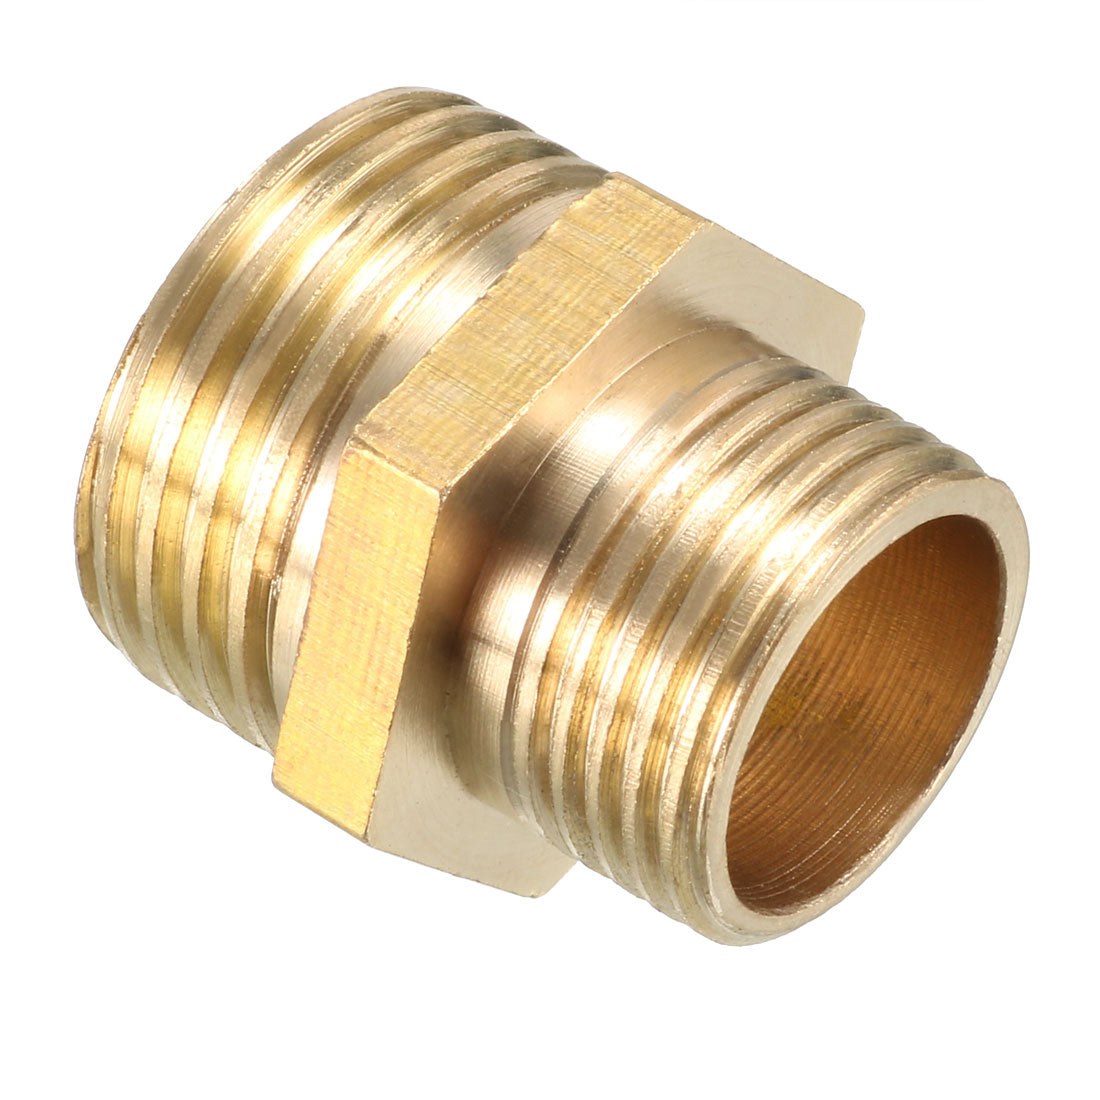 uxcell Uxcell Brass Pipe Fitting Reducing Hex Bushing 1/2 BSP Male x 3/8 BSP Male Adapter 2pcs